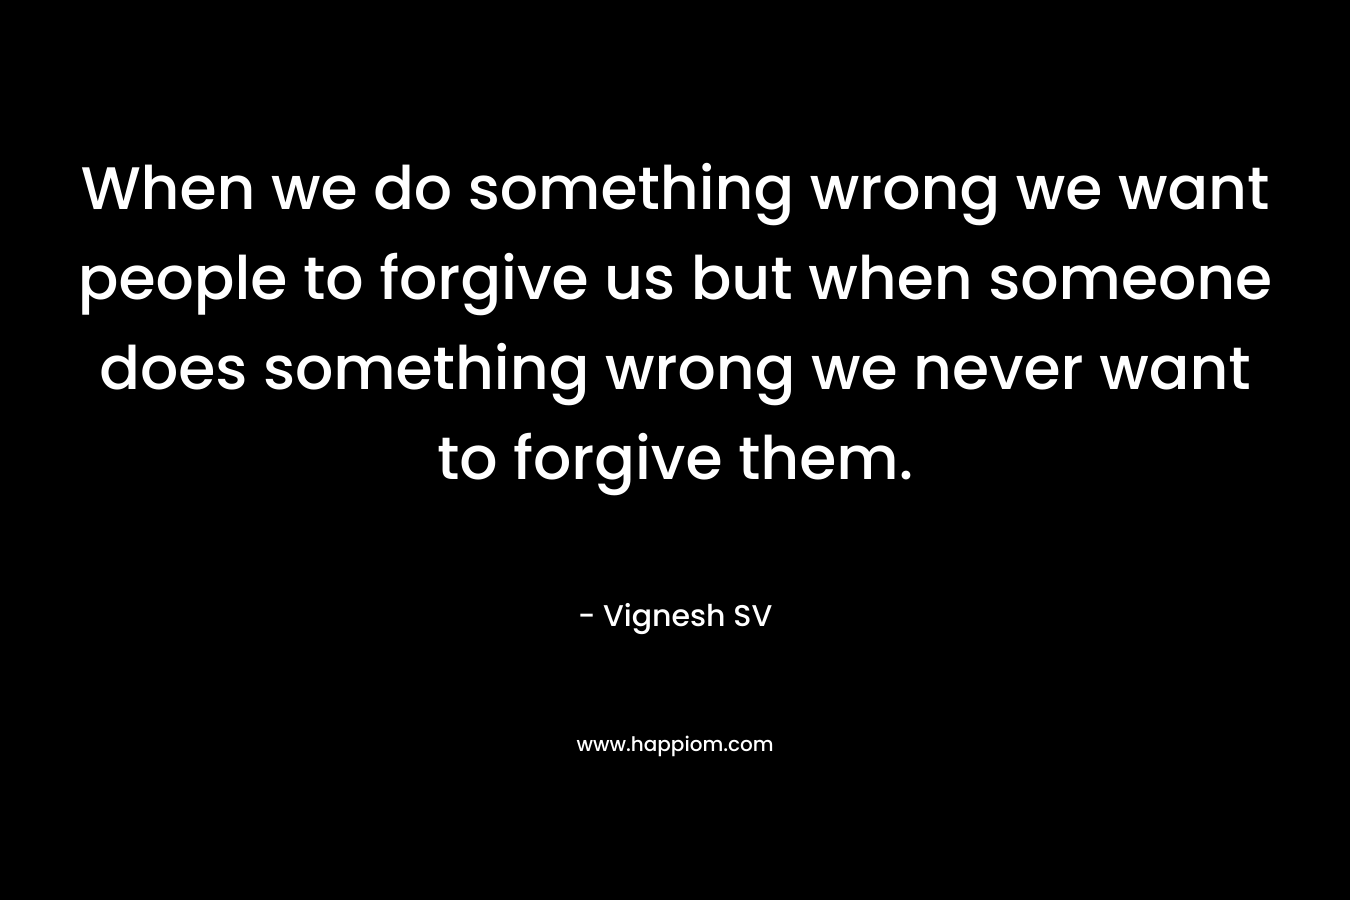 When we do something wrong we want people to forgive us but when someone does something wrong we never want to forgive them.